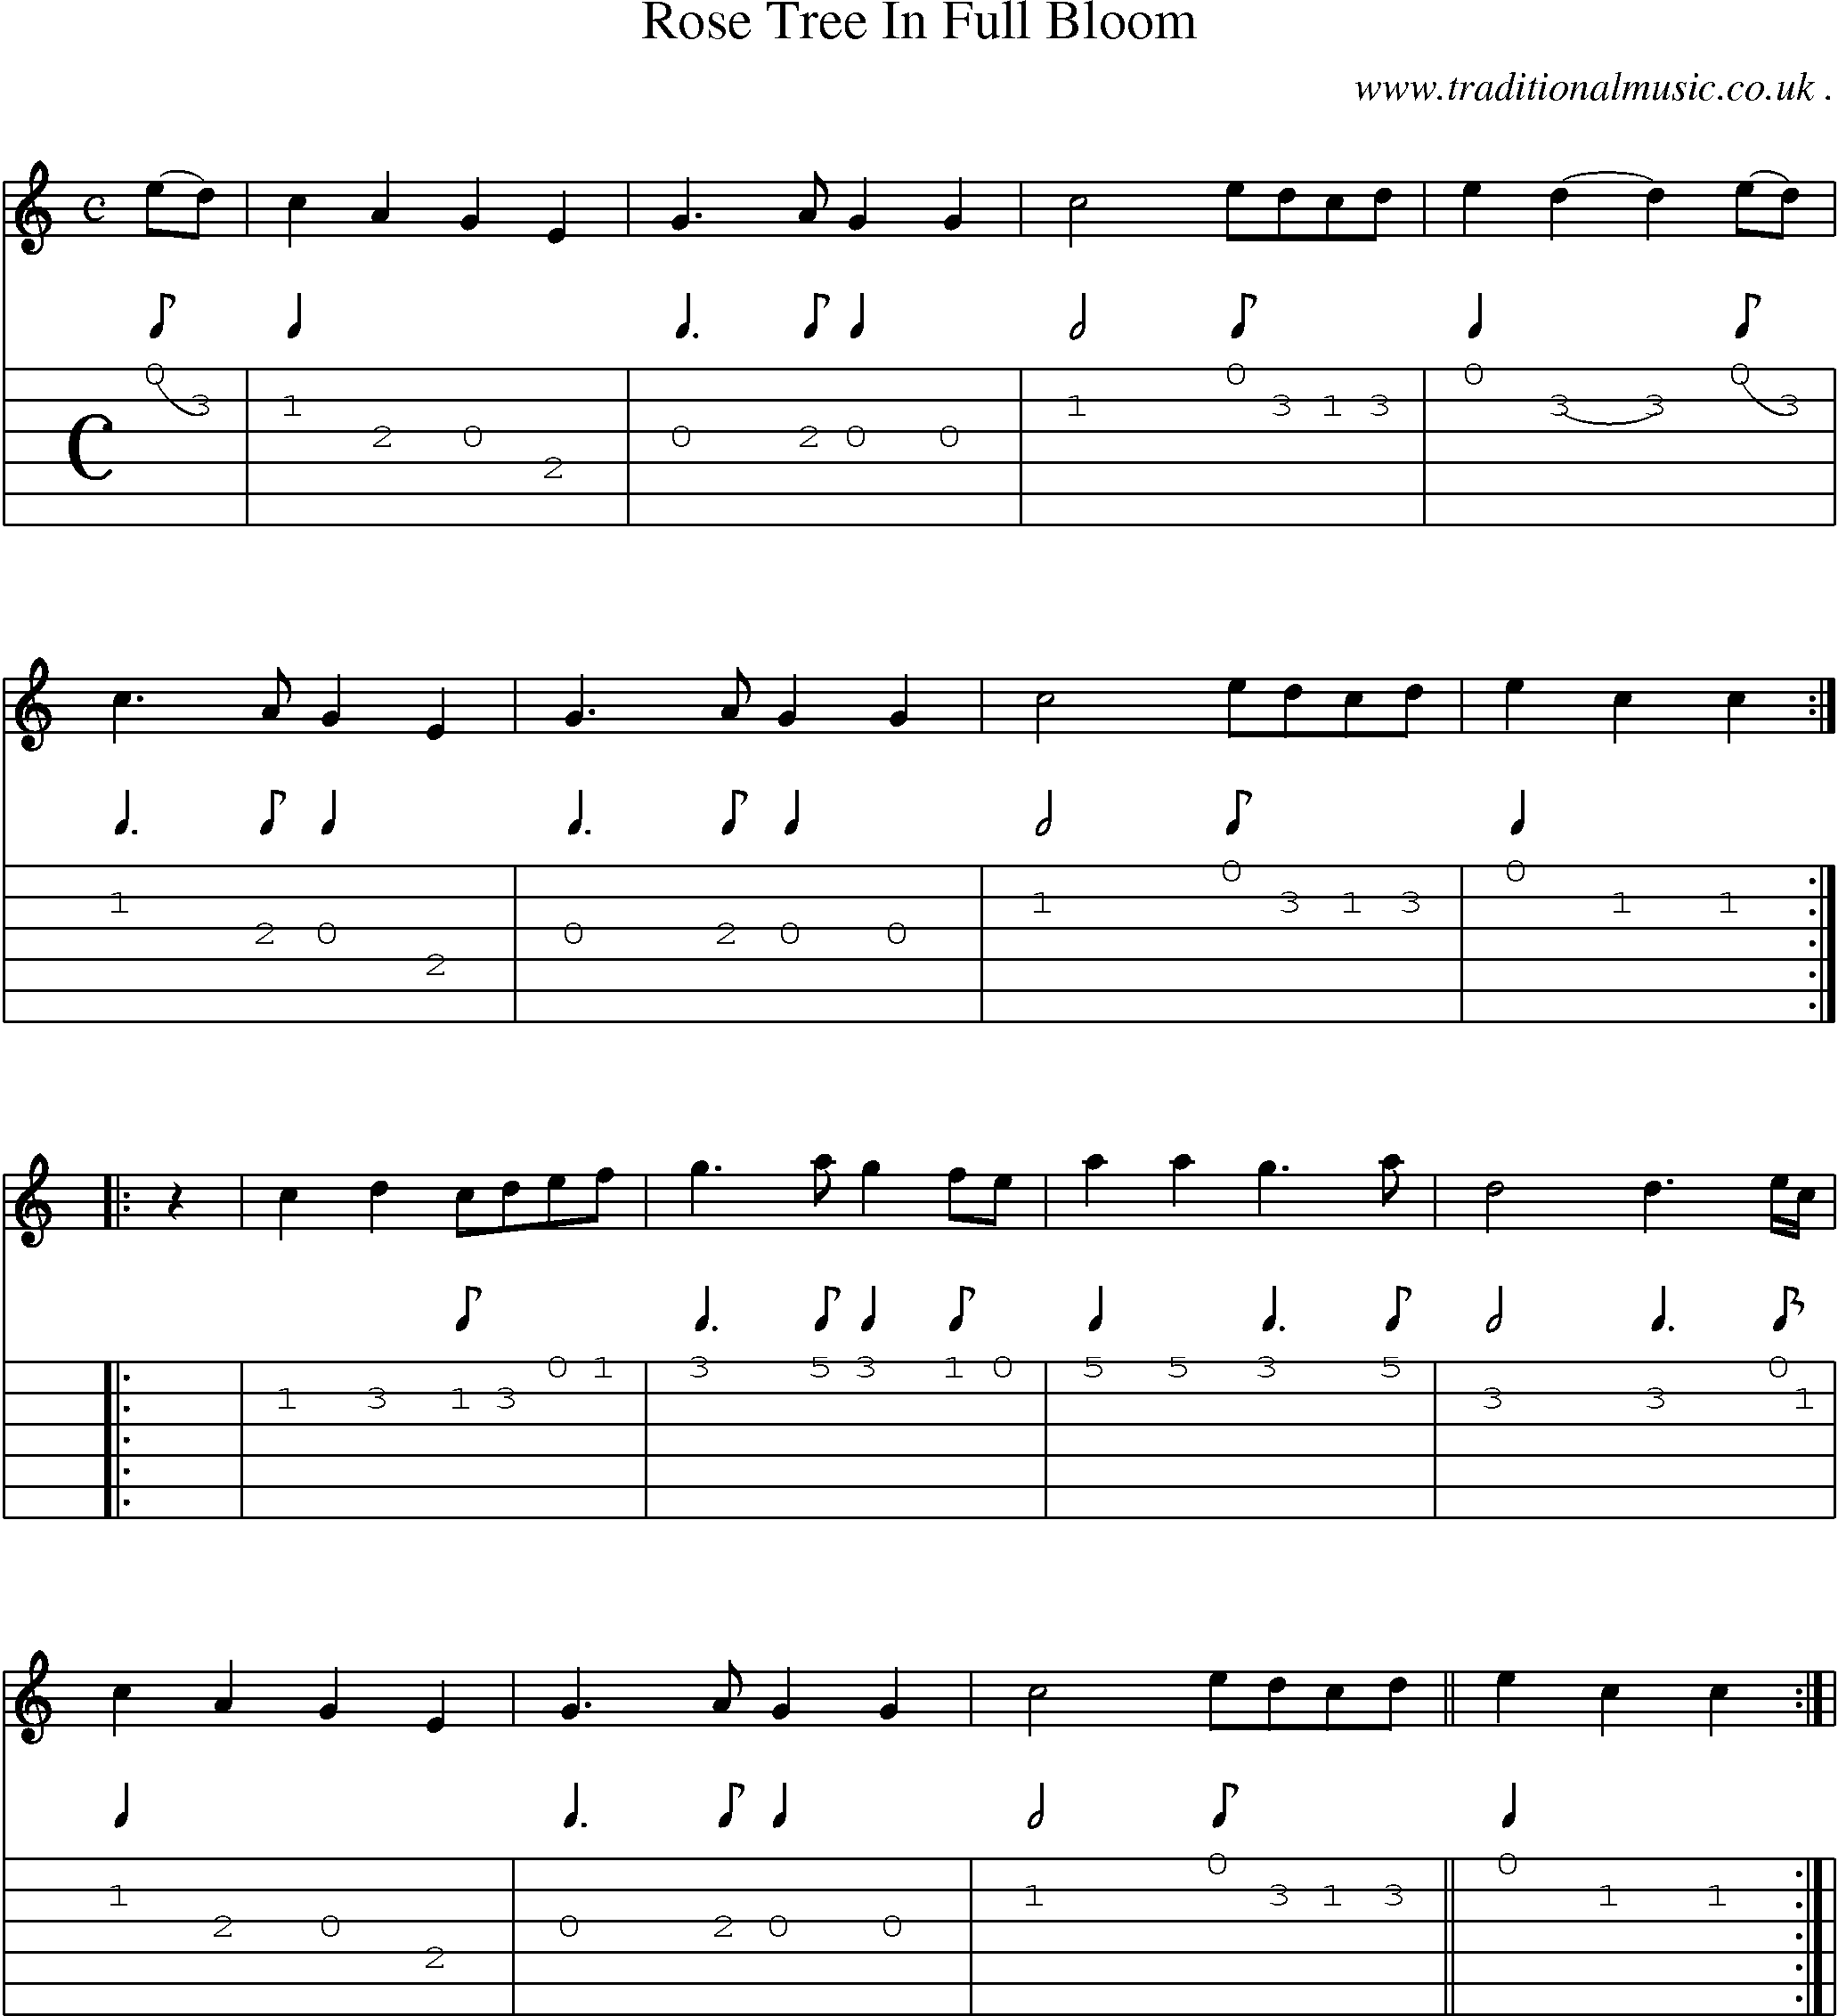 Sheet-Music and Guitar Tabs for Rose Tree In Full Bloom